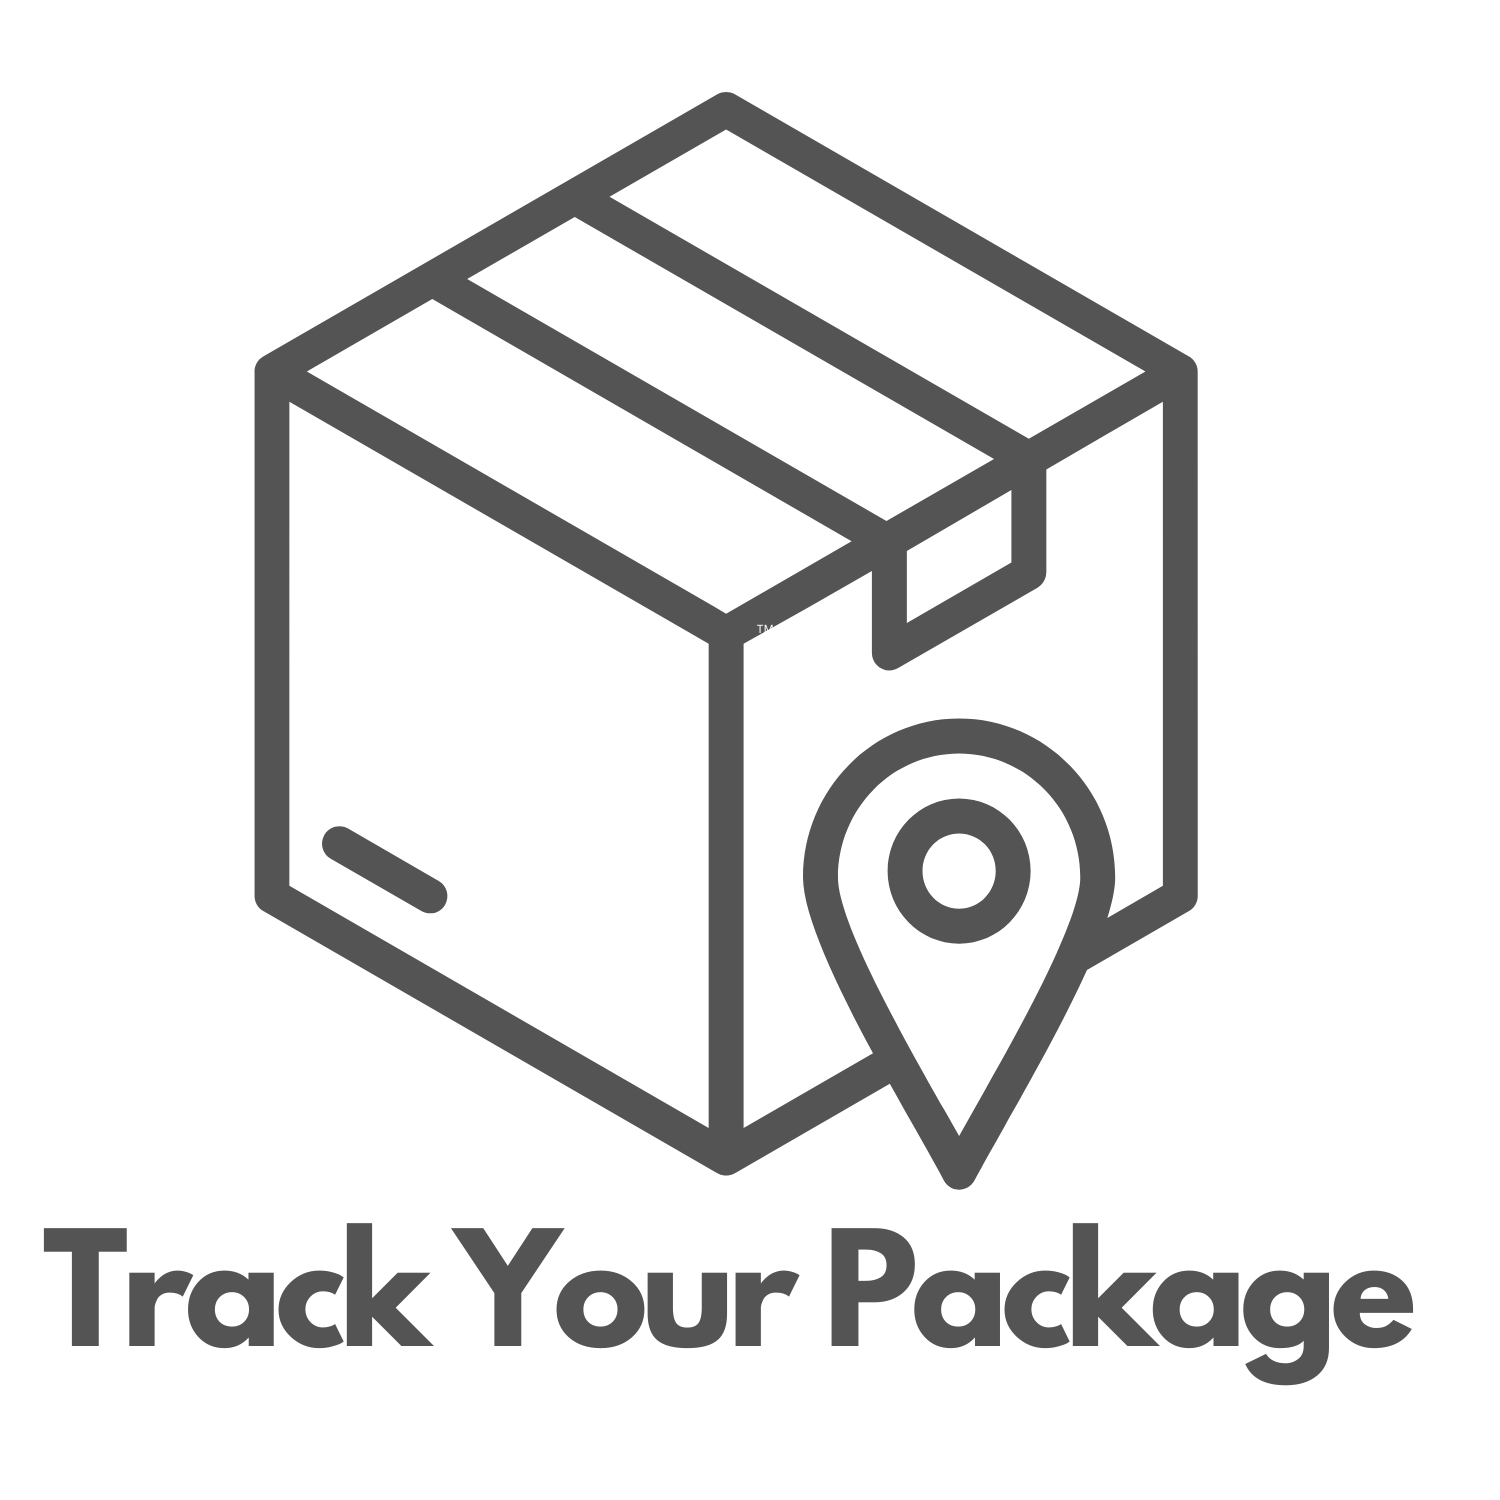 unique-feng-track-your-package.png